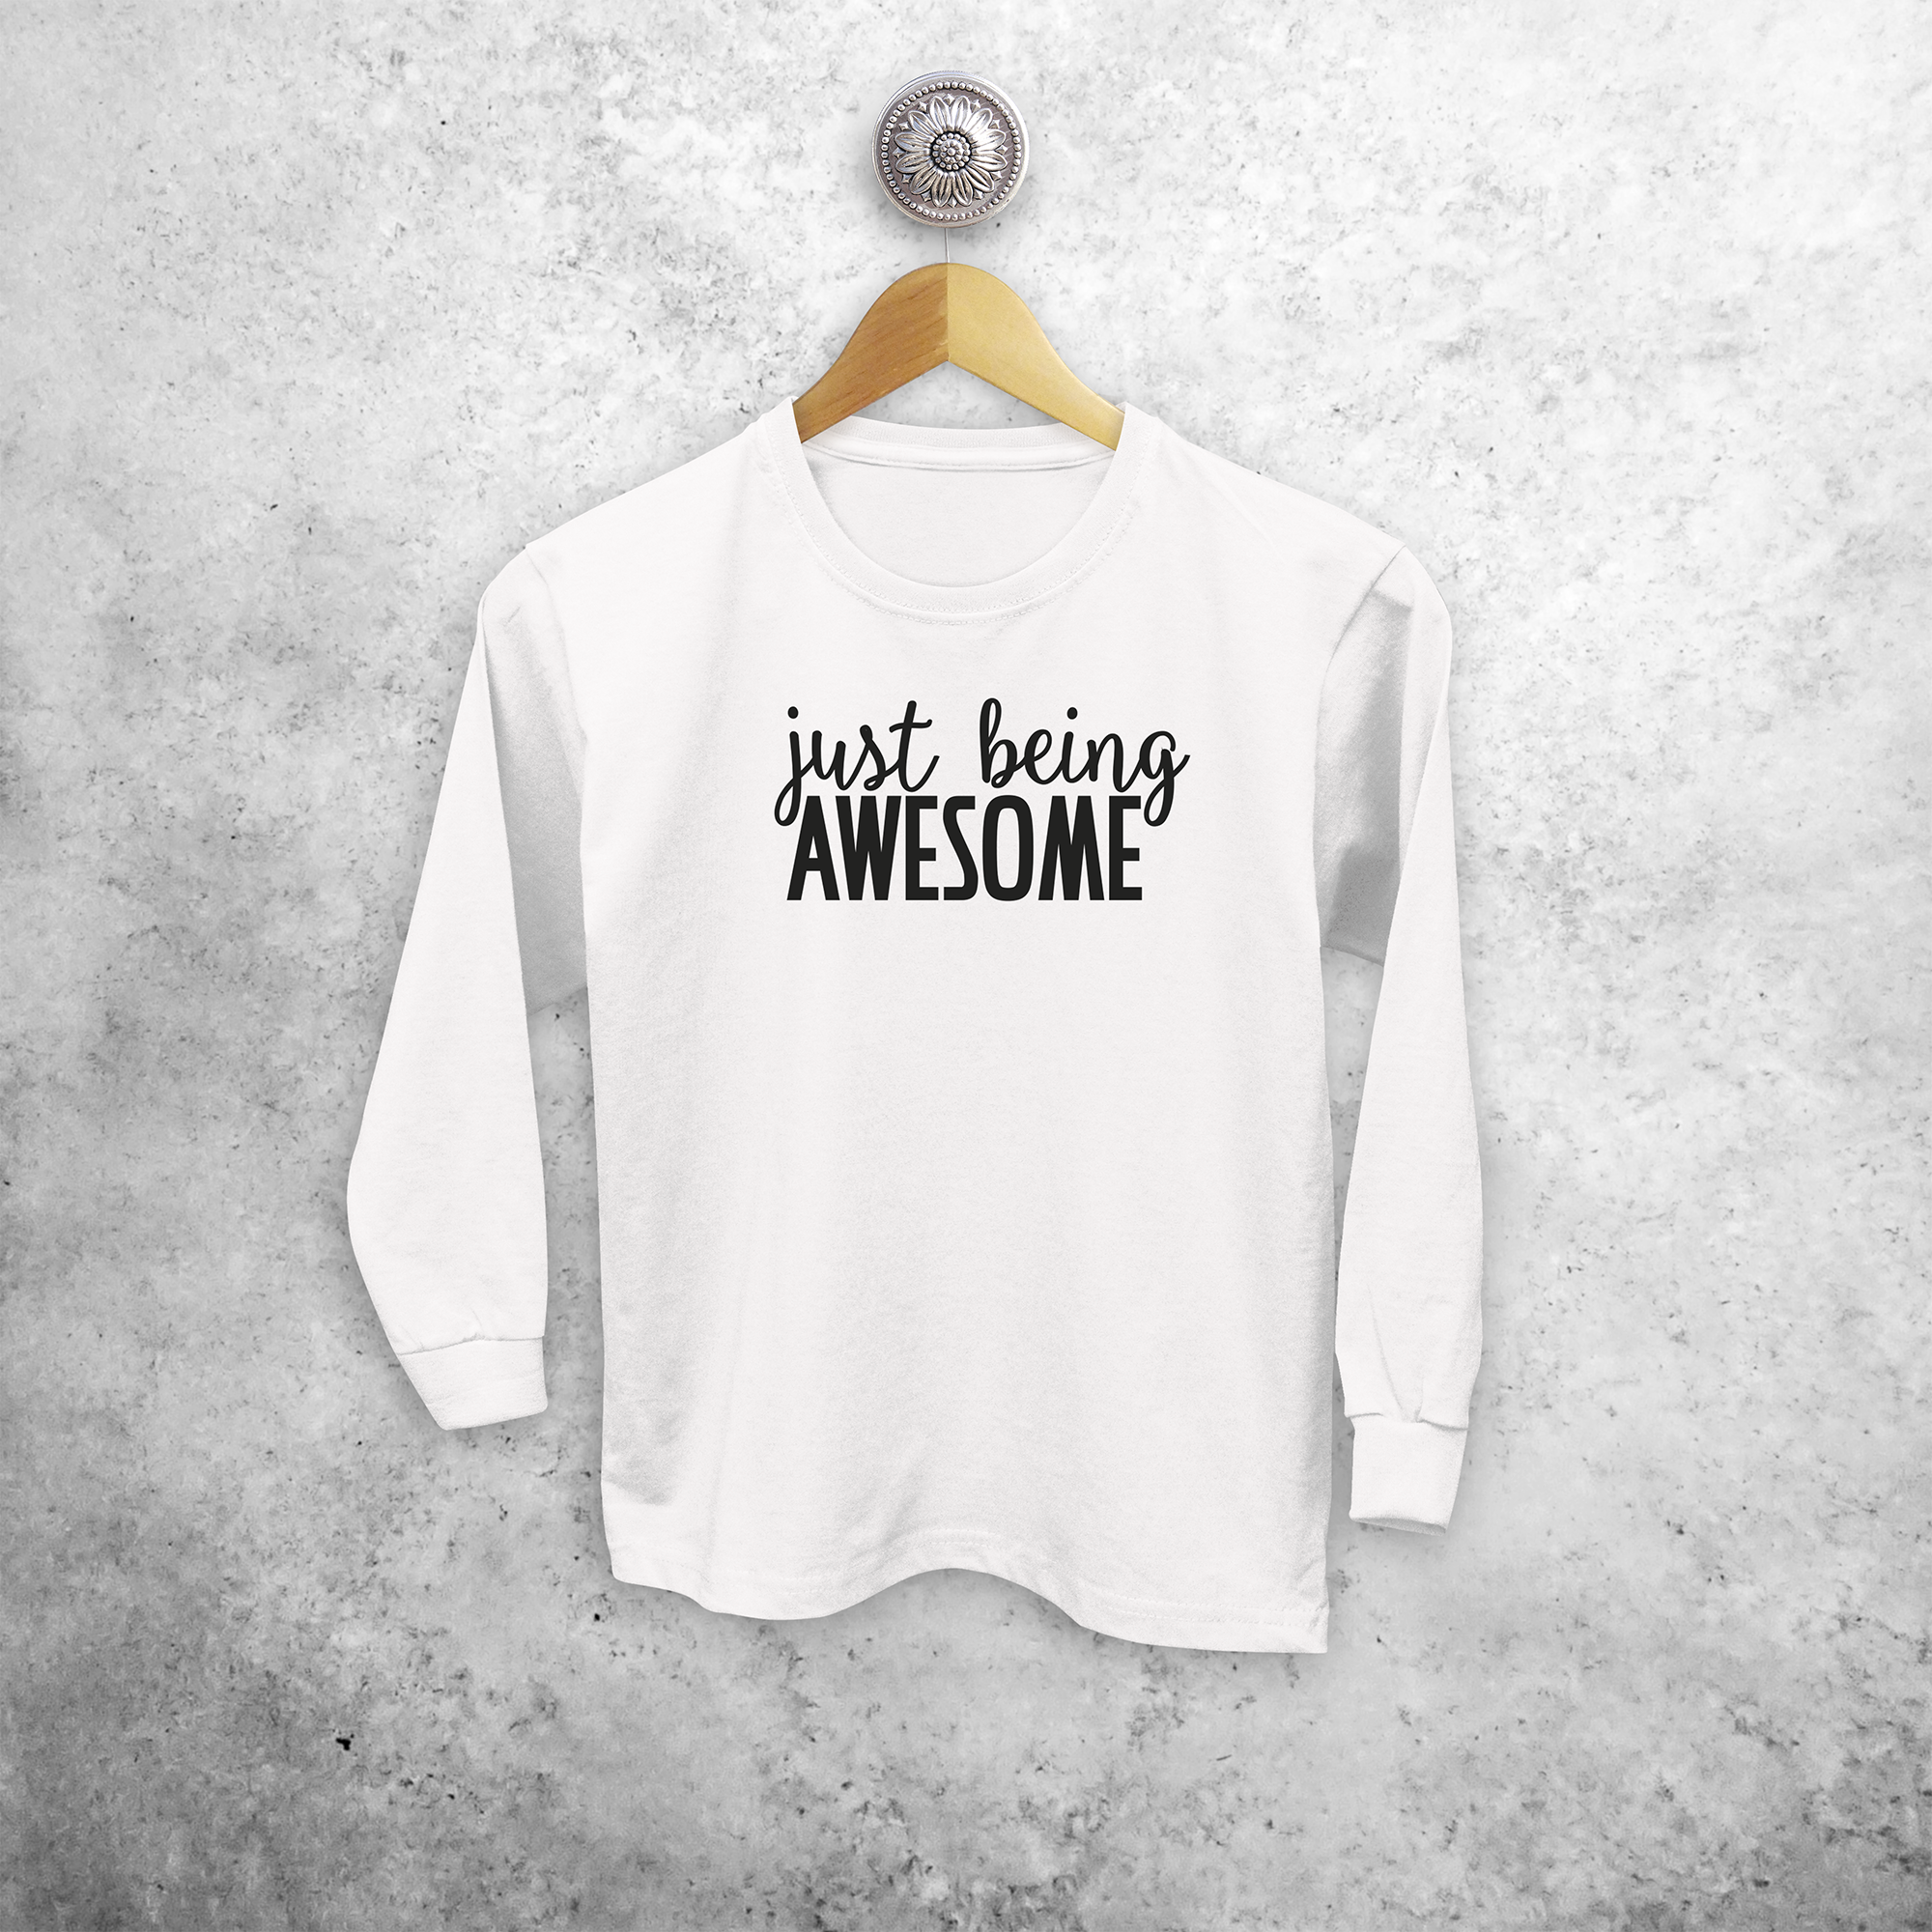 'Just being awesome' kids longsleeve shirt